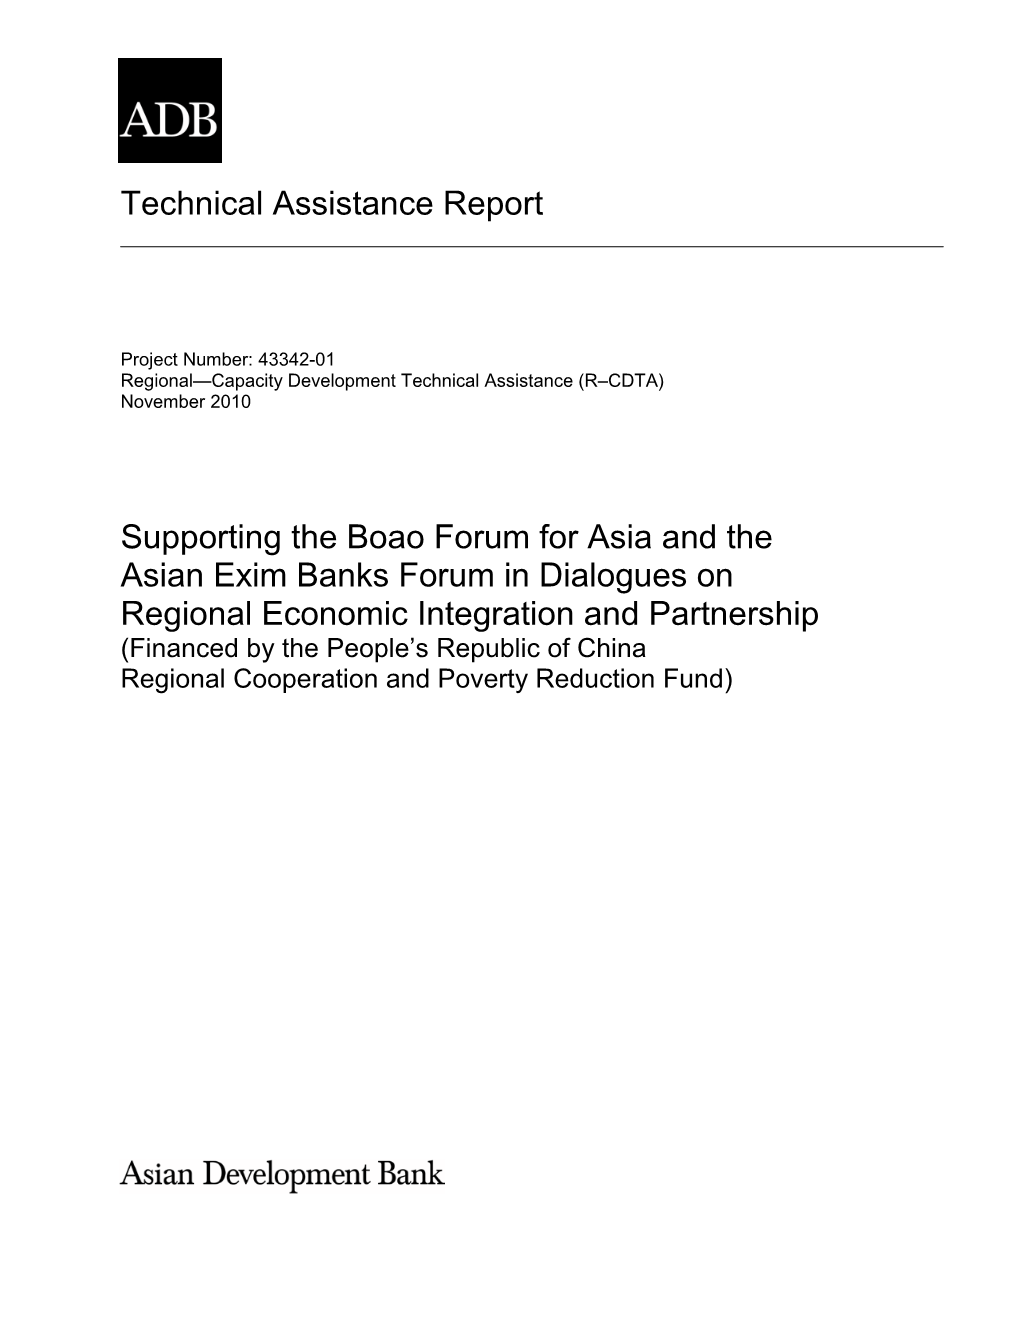 Supporting the Boao Forum for Asia and The